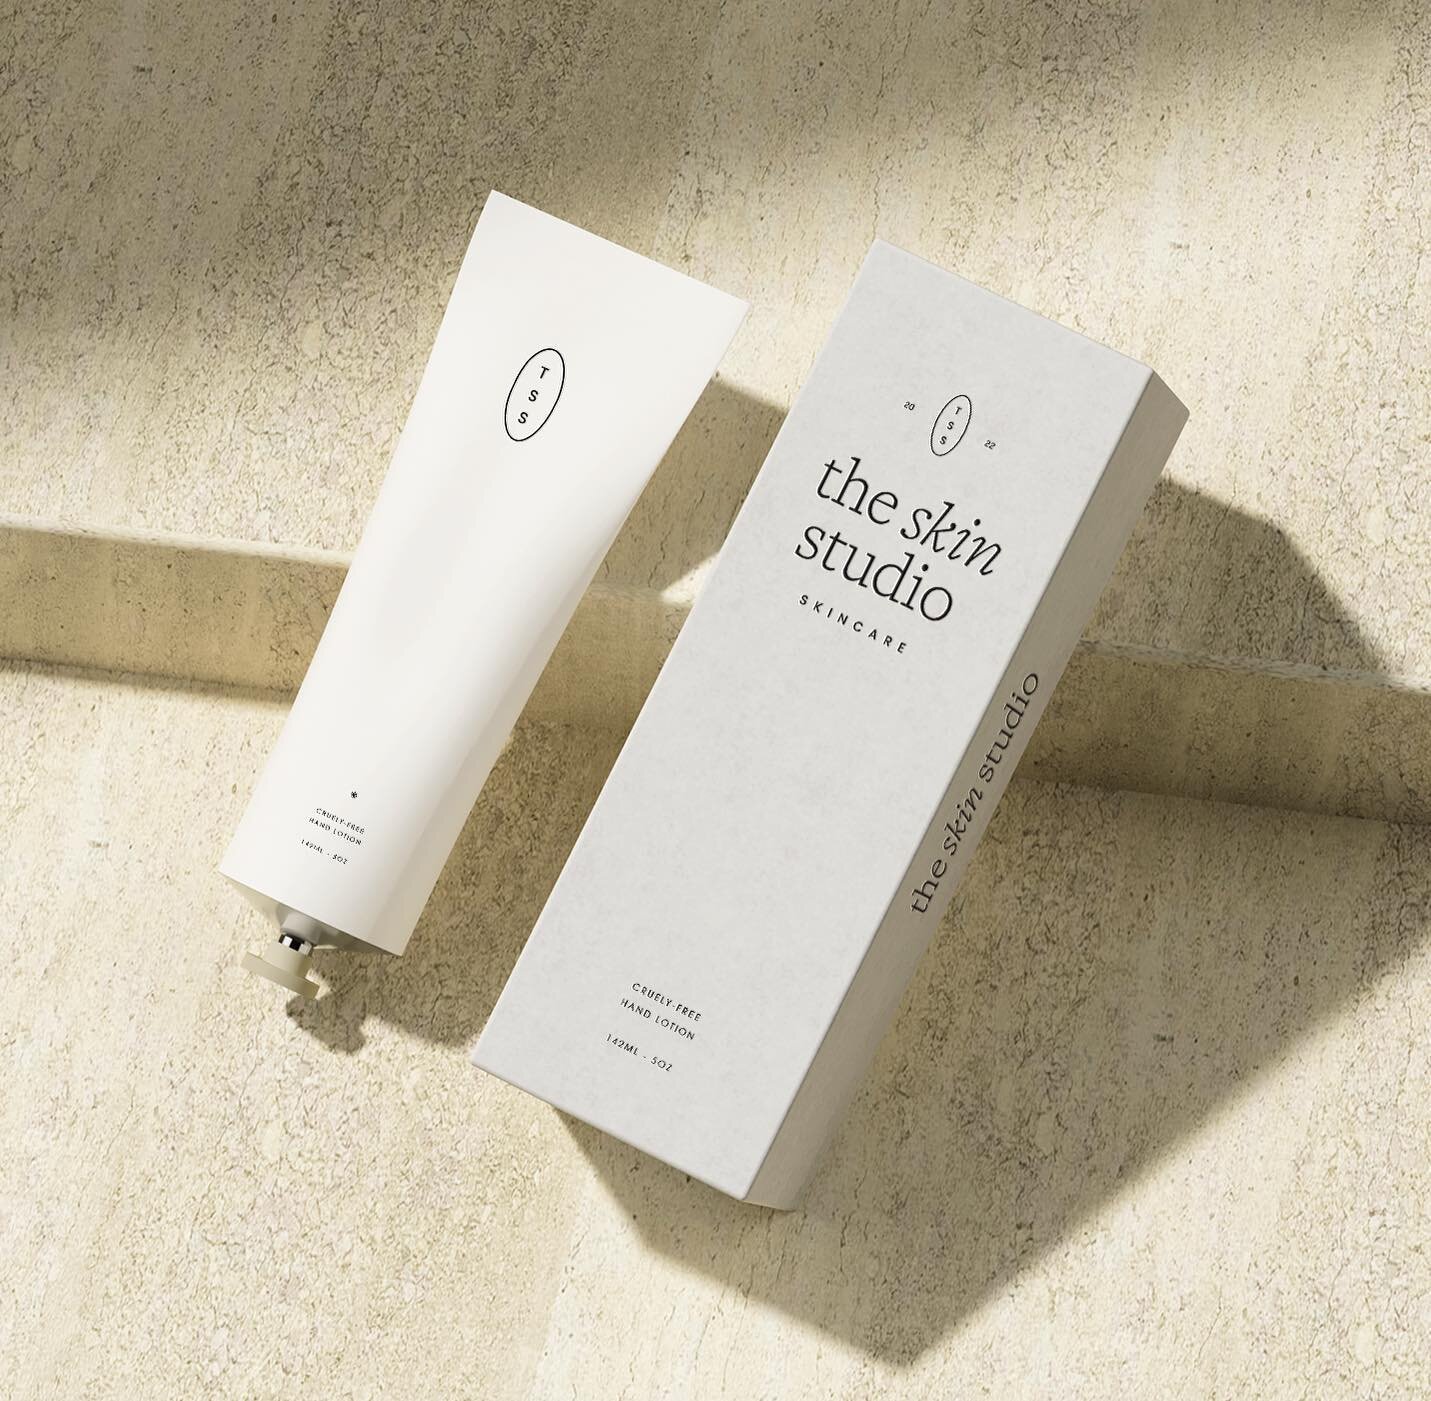 Packaging design for The Skin Studio, an organic, ethically made skincare brand. An elegant, high-end &amp; premium brand. Let me know what you think, thank you!

Mock-up @harmonais.visual 

READY TO GIVE YOUR BRAND LIFE? I want to help you share you